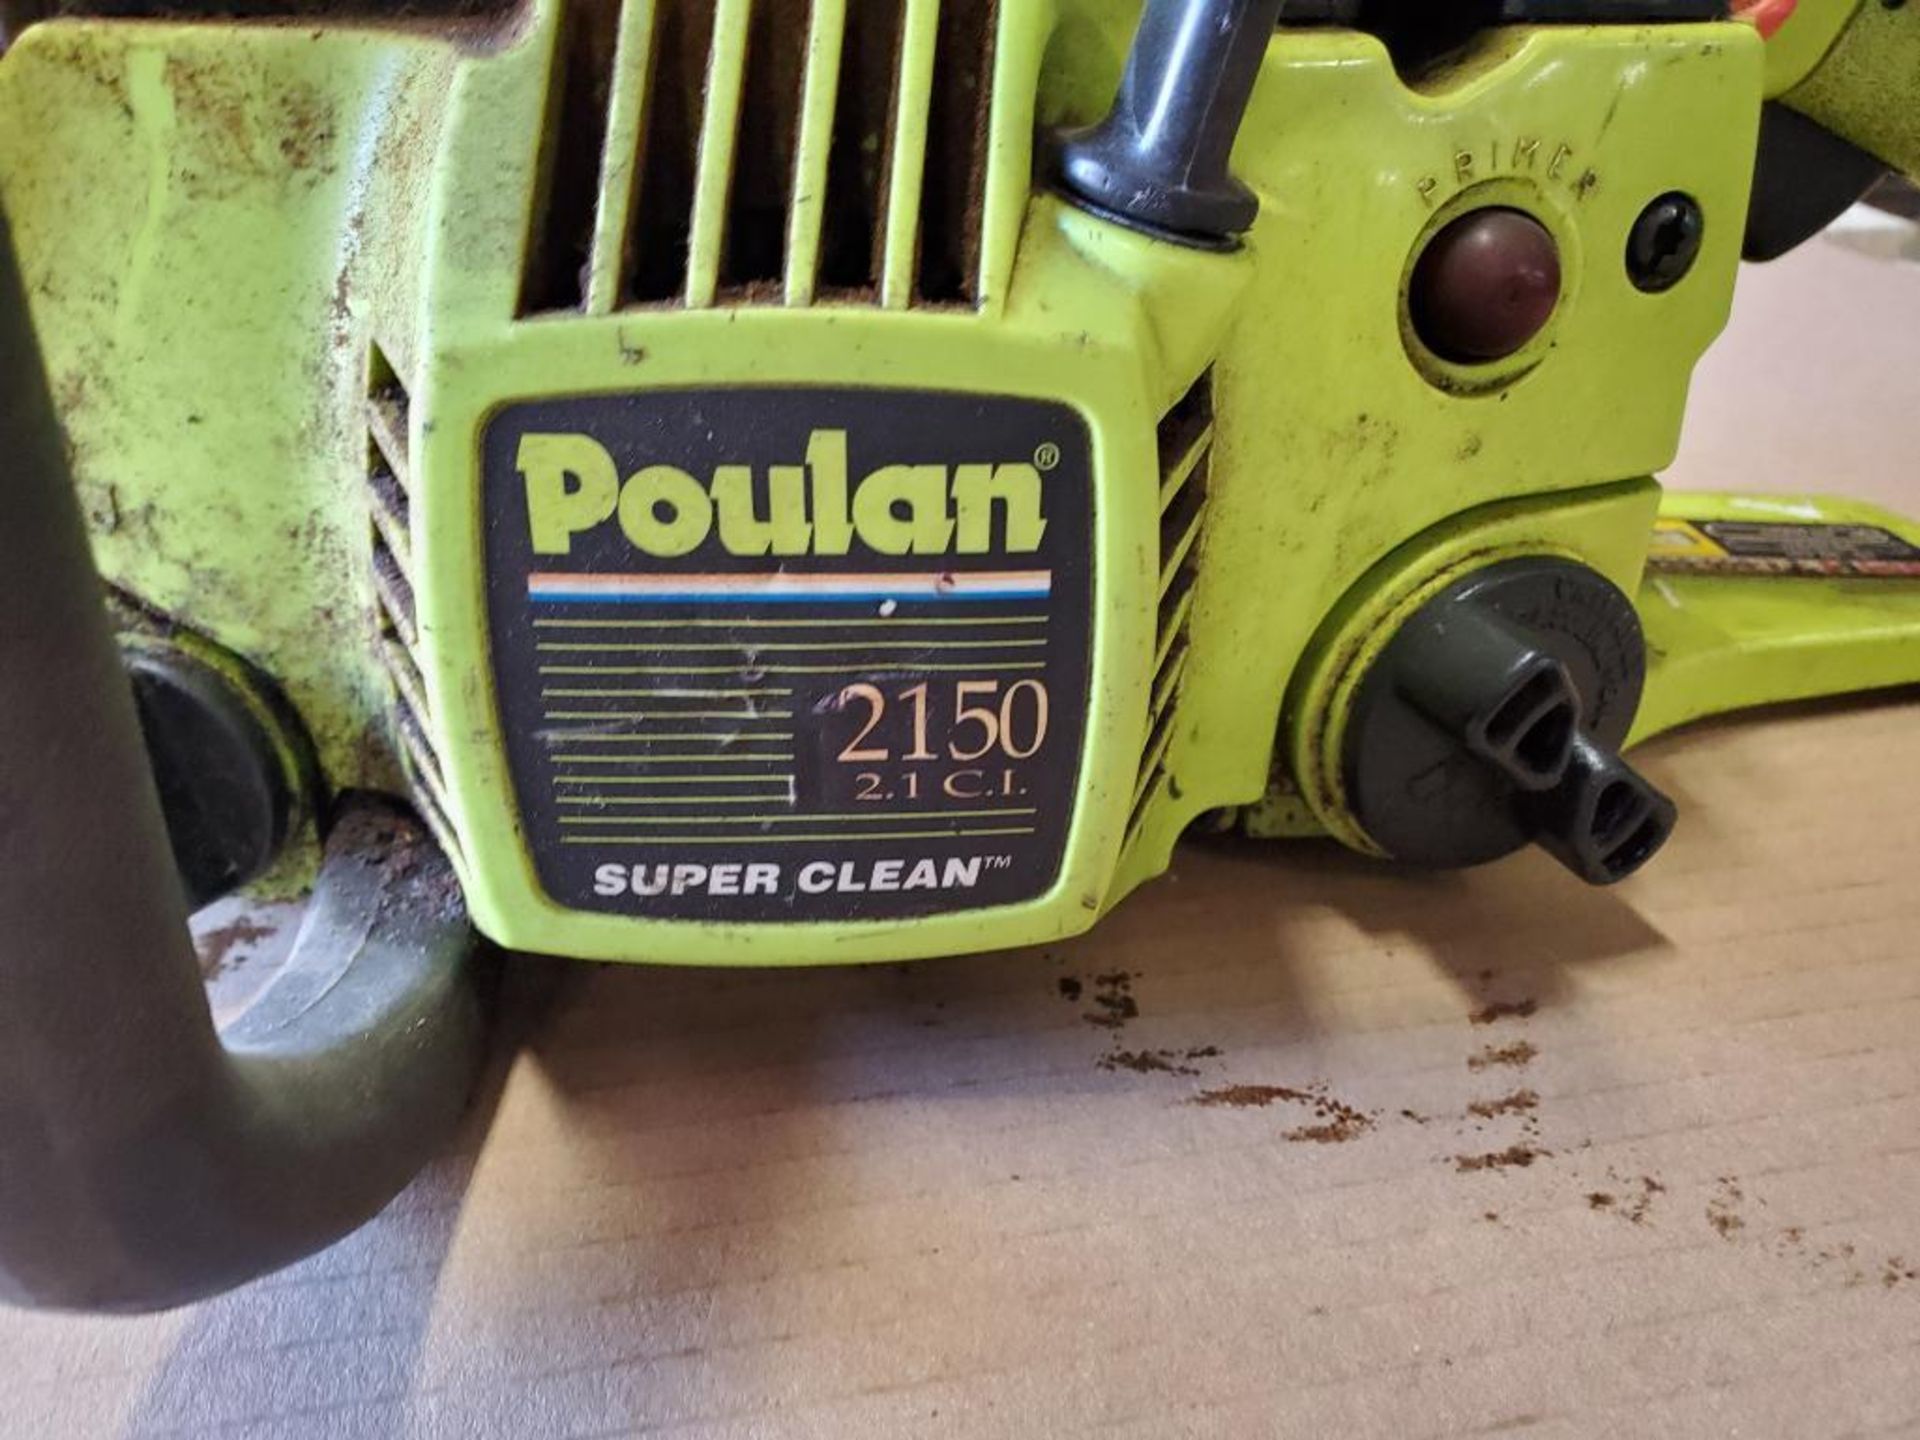 Poulan 2150 2.1CL super clean chainsaw. - Image 4 of 12